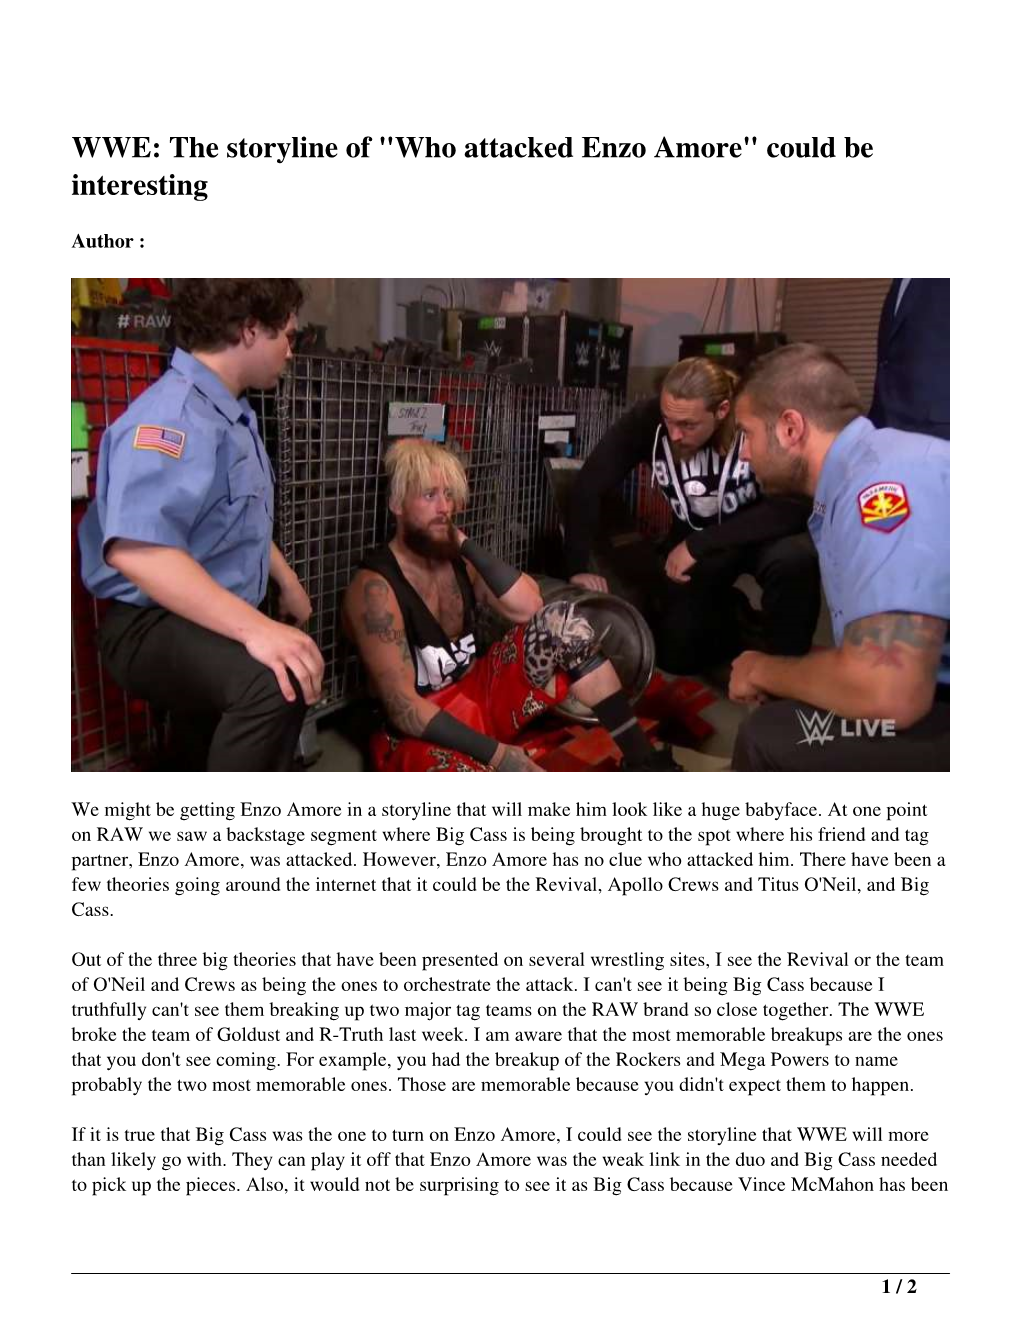 WWE: the Storyline of "Who Attacked Enzo Amore" Could Be Interesting